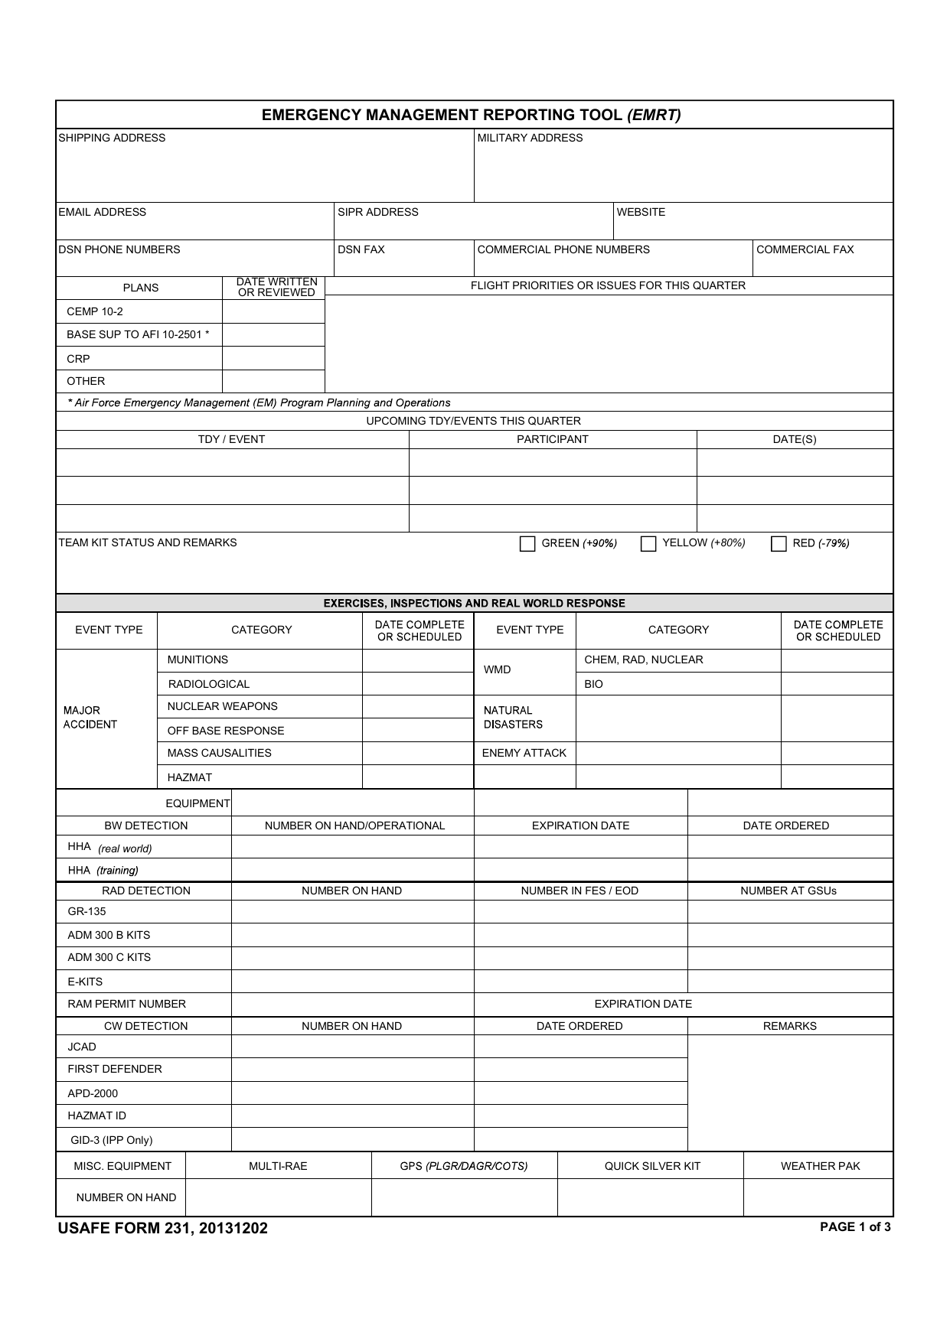 USAFE Form 231 Emergency Management Reporting Tool (Emrt), Page 1